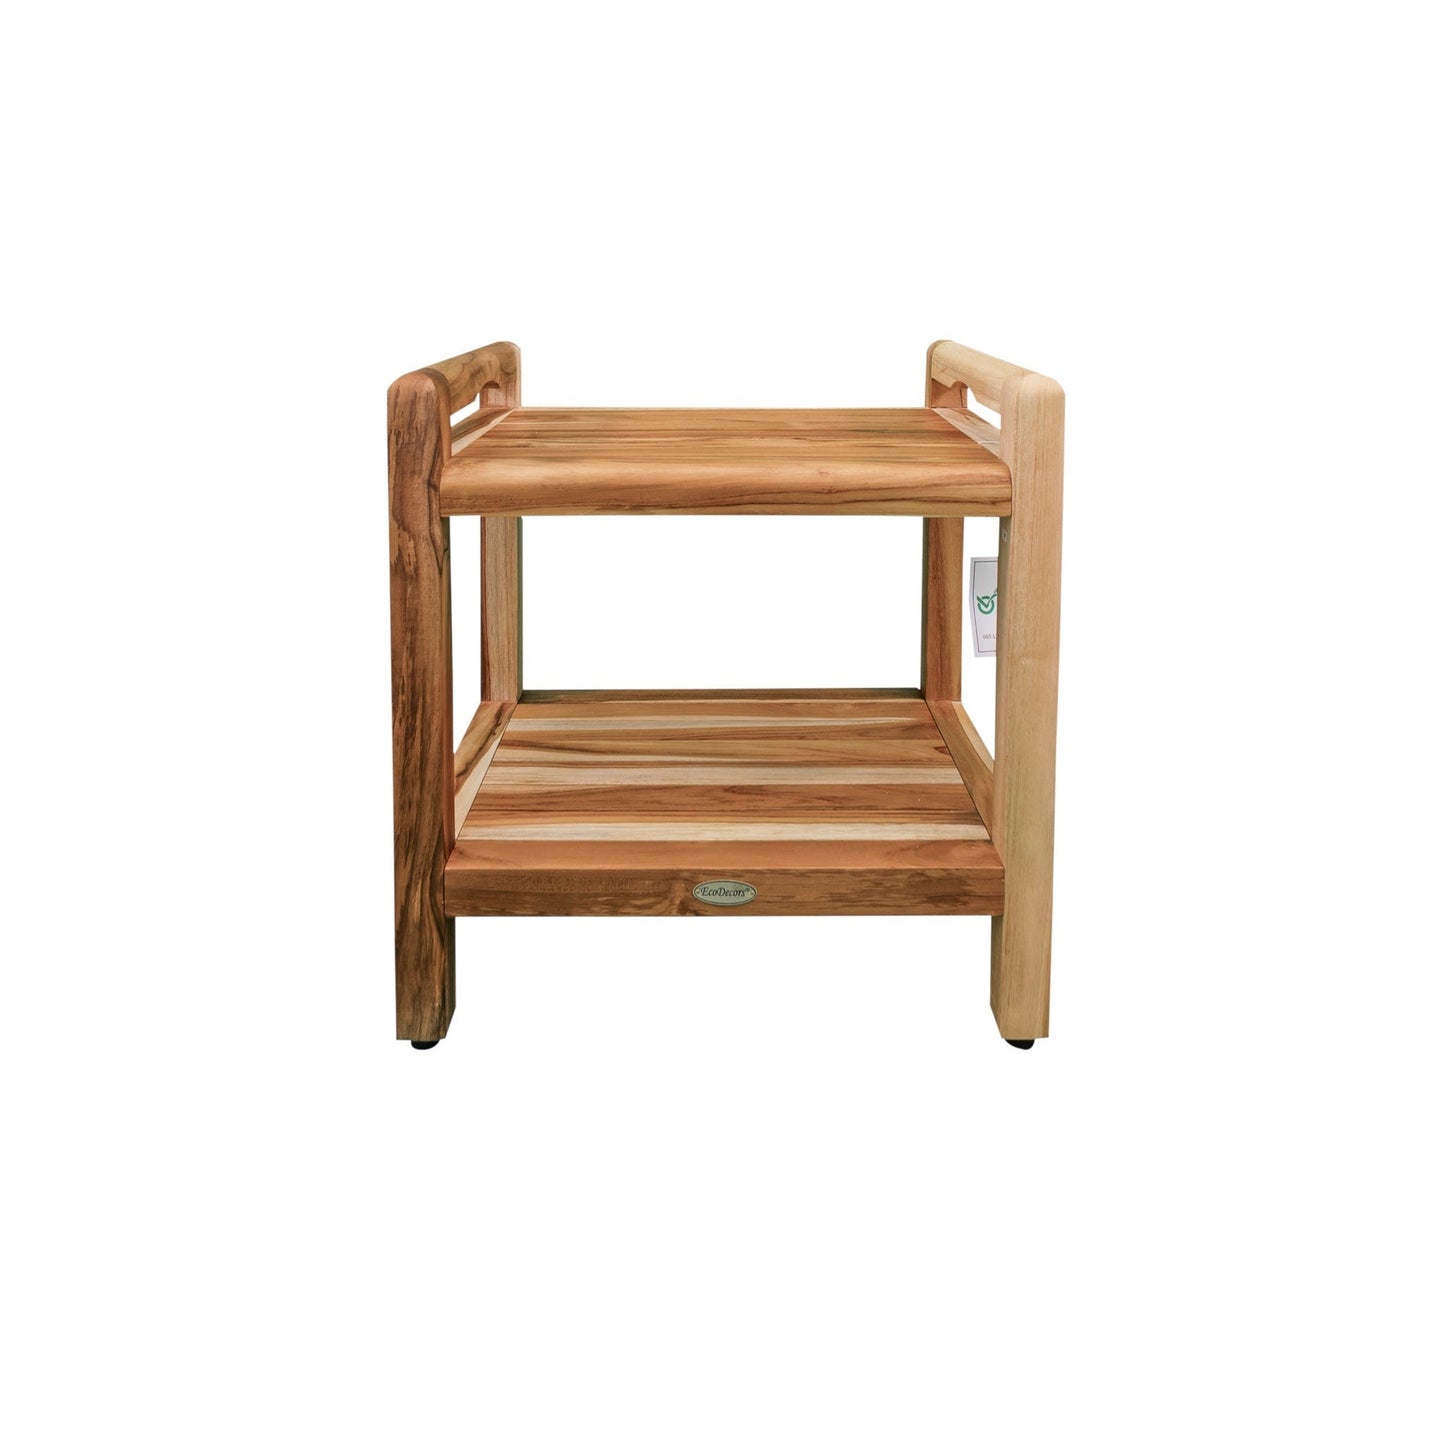 EcoDecors Eleganto 20" EarthyTeak Solid Teak Wood Shower Bench With LiftAide Arms and Shelf